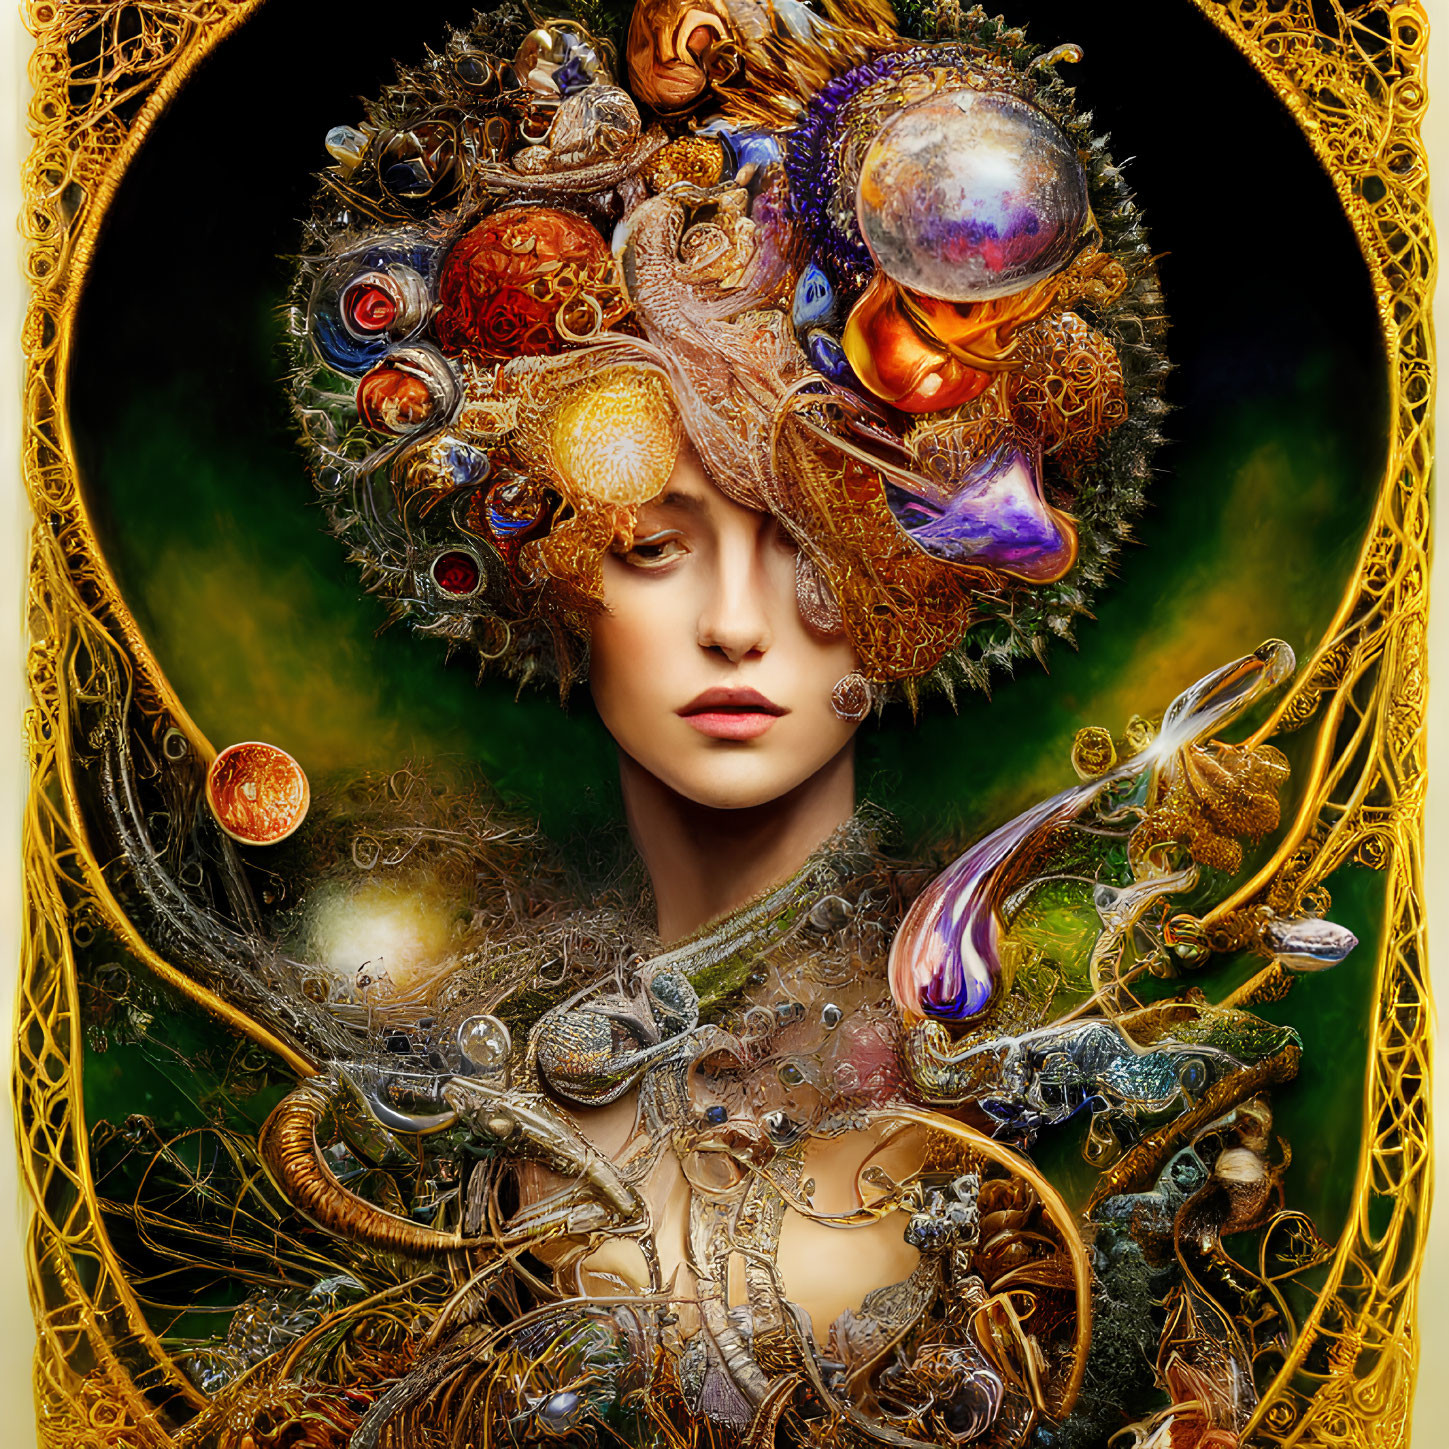 Surreal portrait of a woman with cosmic headdress and golden background